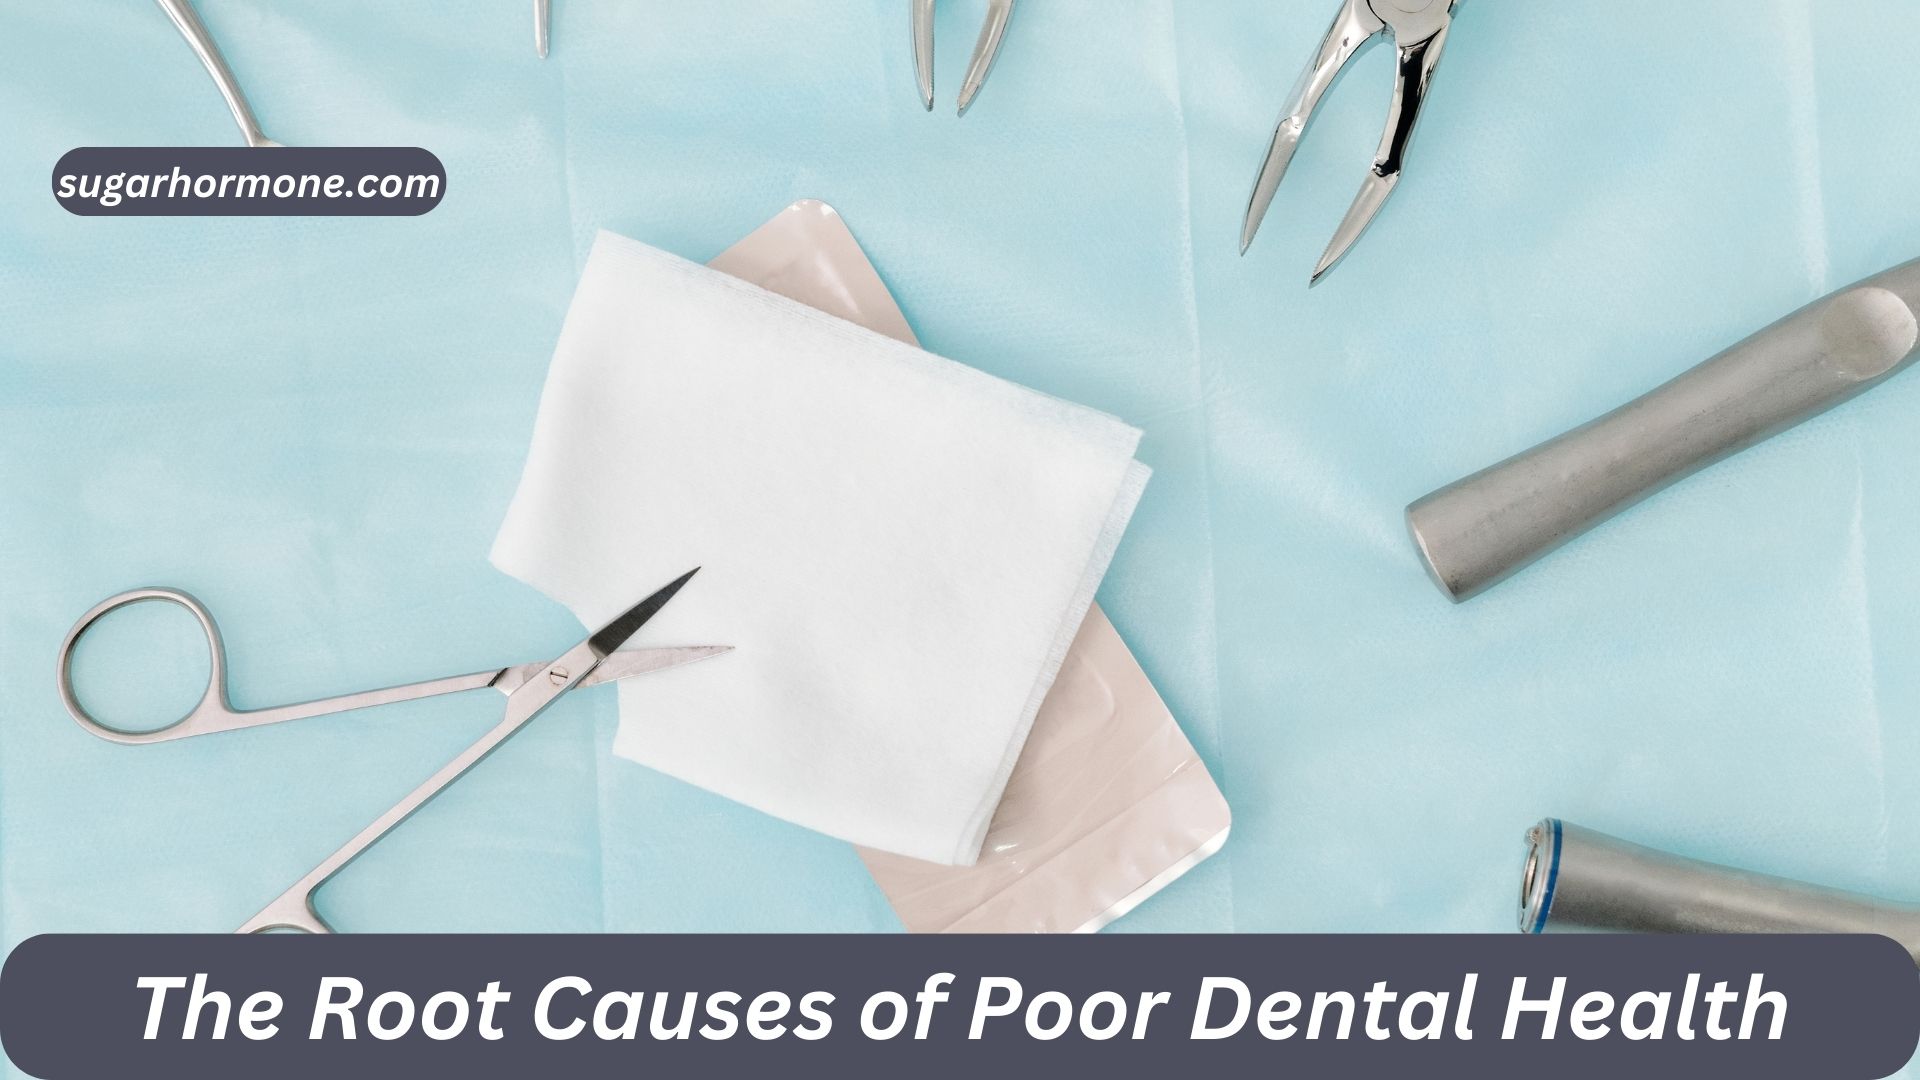 The Root Causes of Poor Dental Health